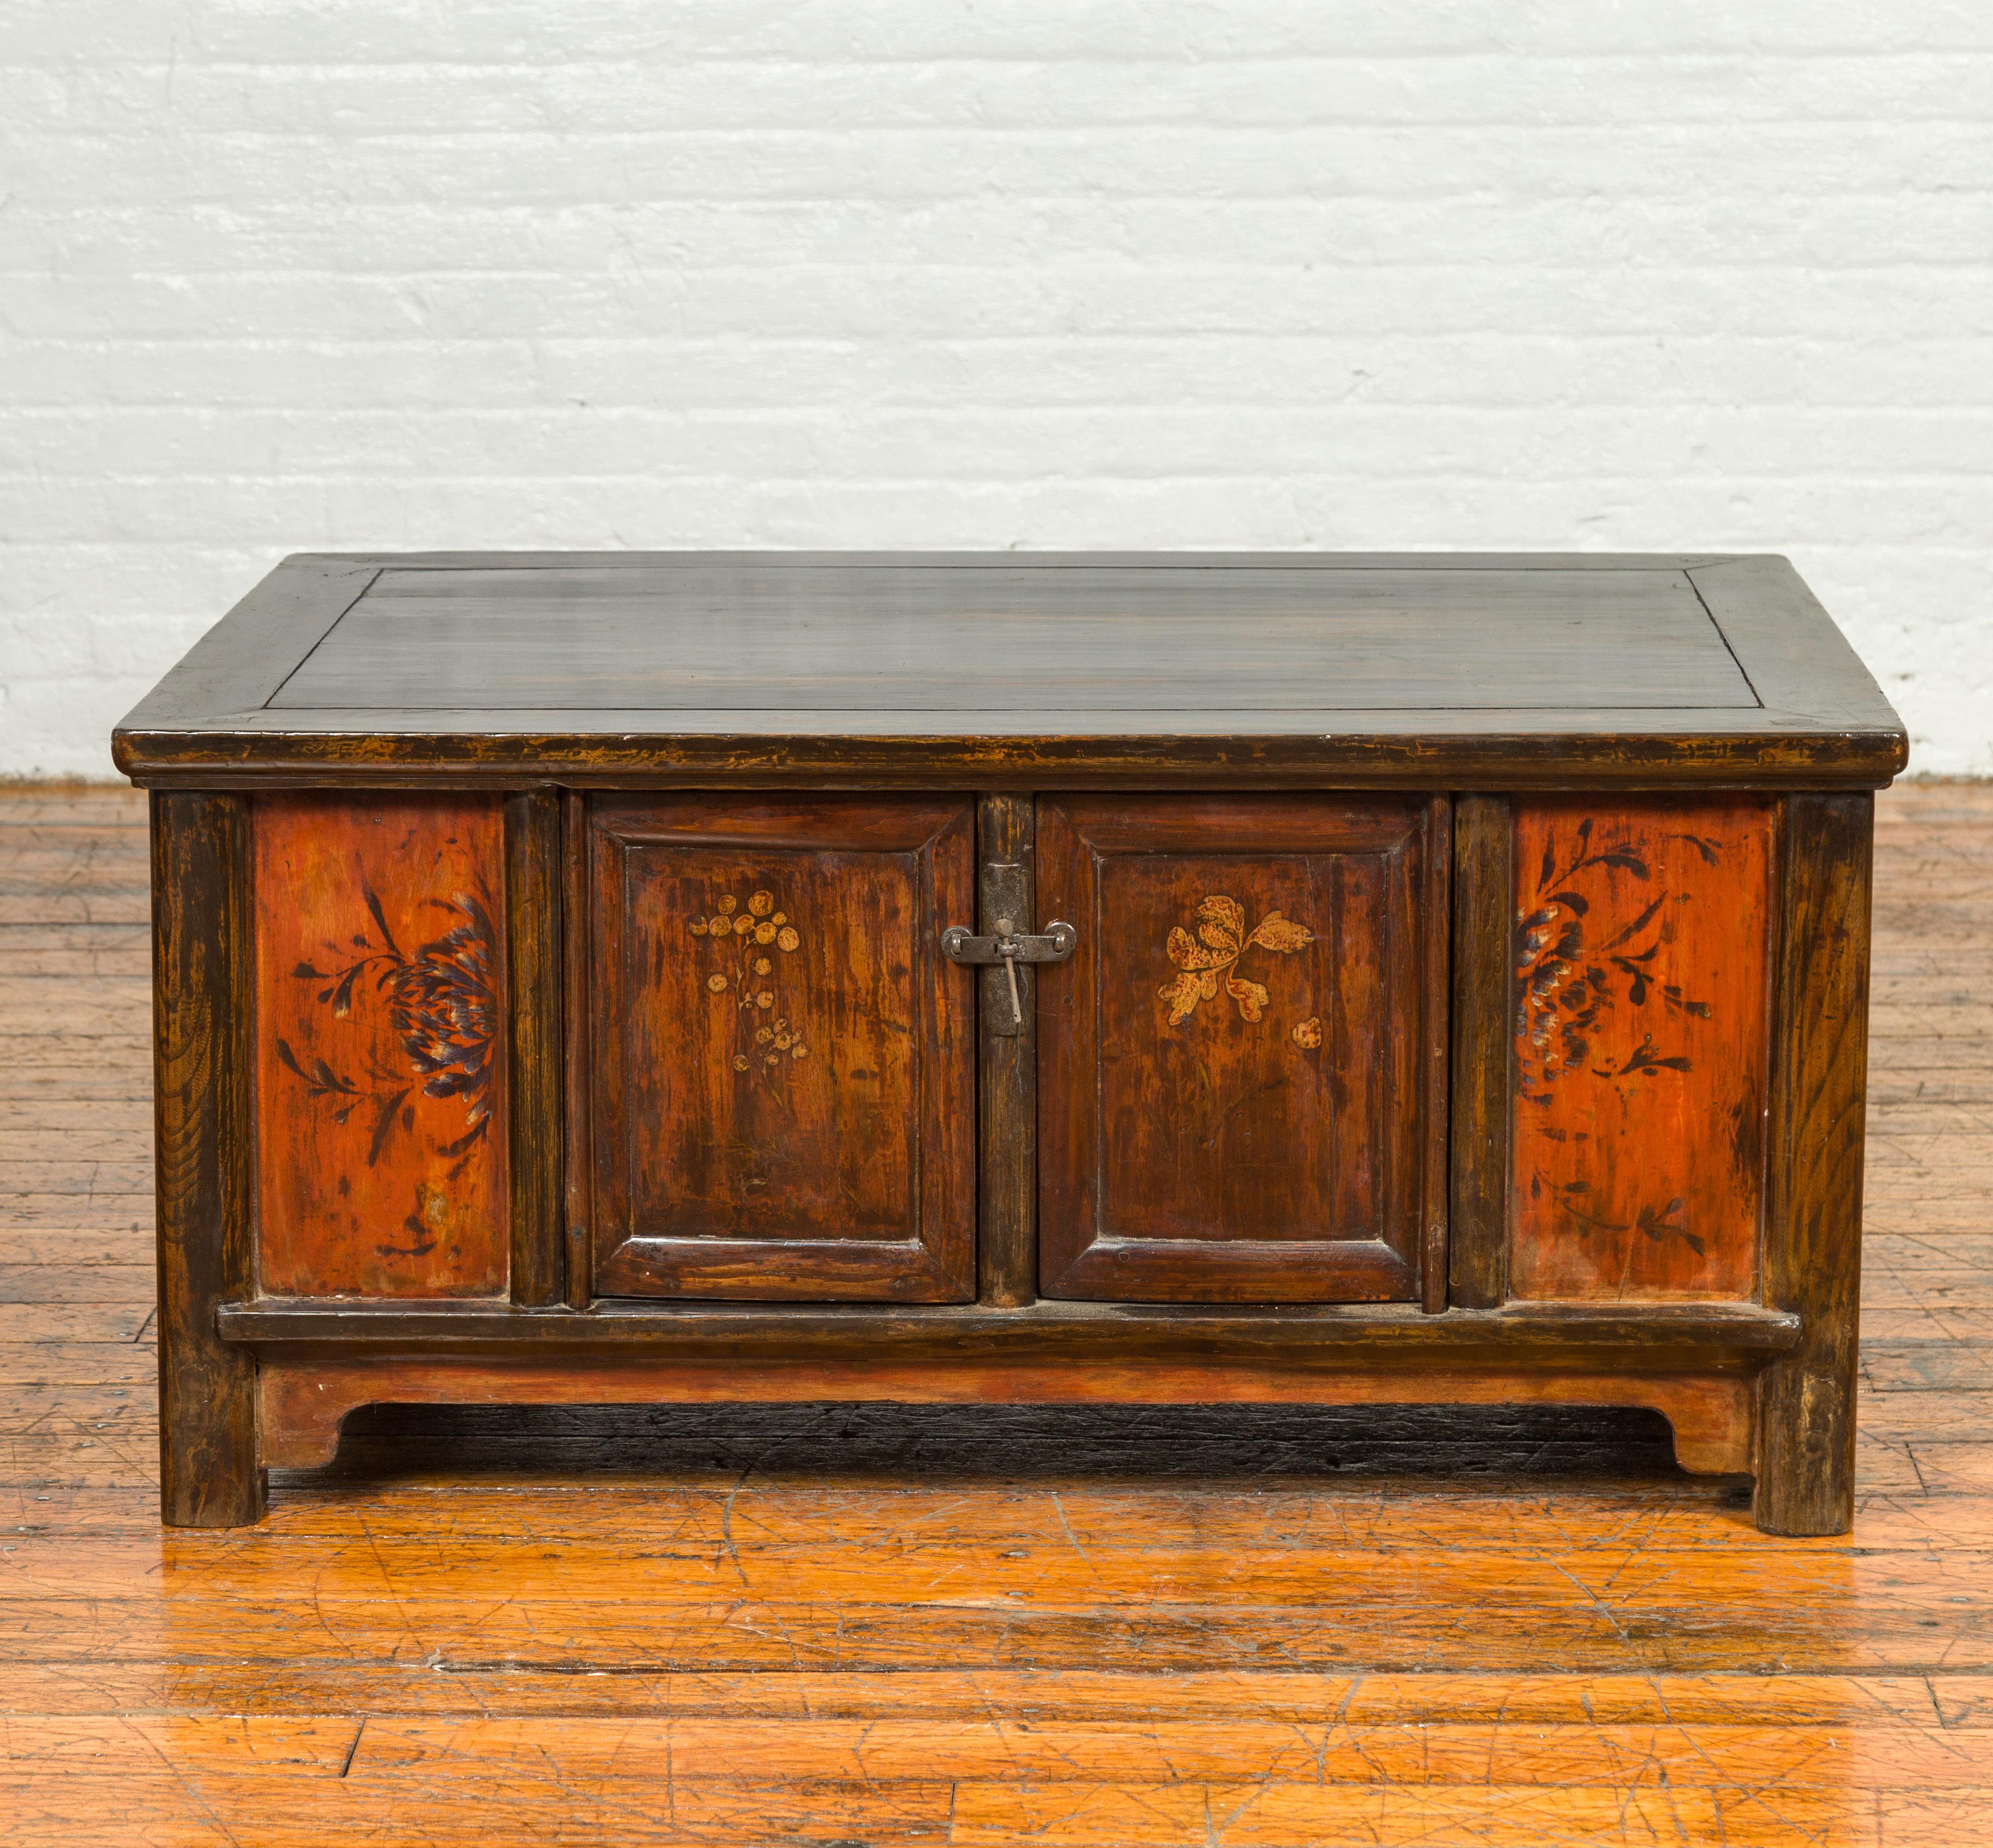 A Chinese Qing dynasty period low coffee table with storage from the 19th century, with hand painted floral decor. Crafted in China during the 19th century, this low coffee table charms us with its hand painted decor and convenient storage space. A